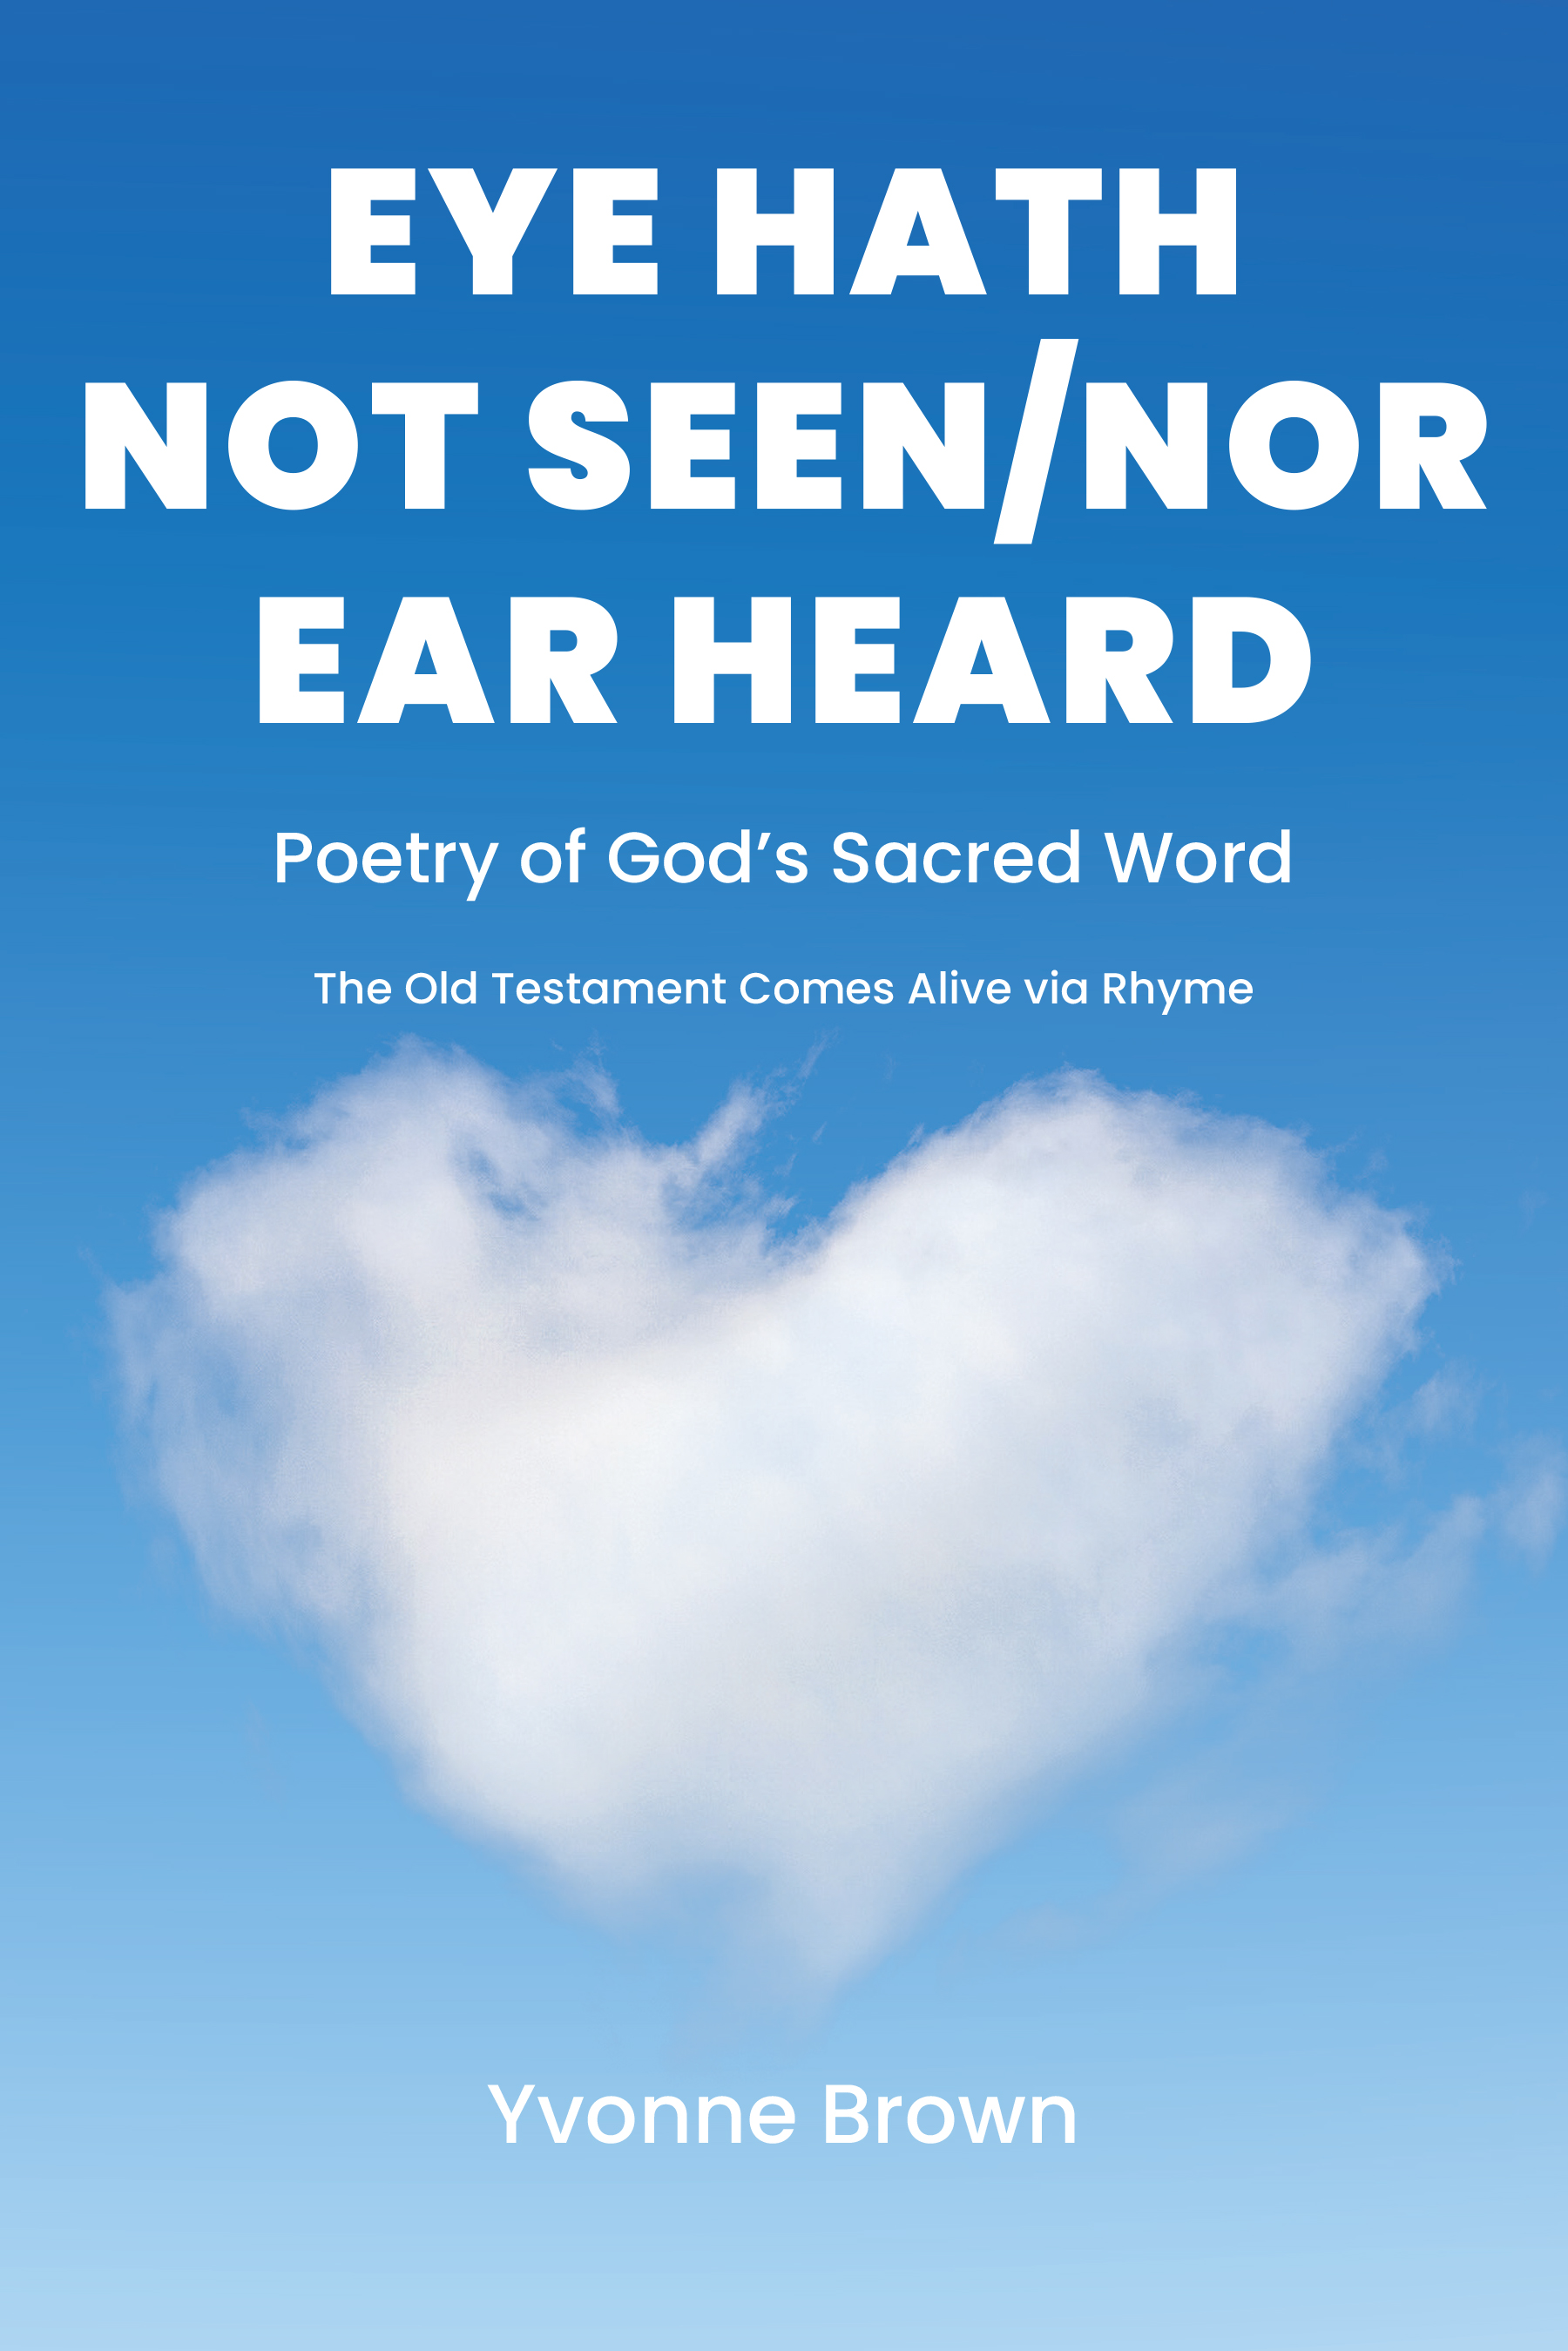 Yvonne Brown’s Newly Released "Eye Hath Not Seen-Nor Ear Heard" is a Unique and Inspiring Collection of Poetic Works